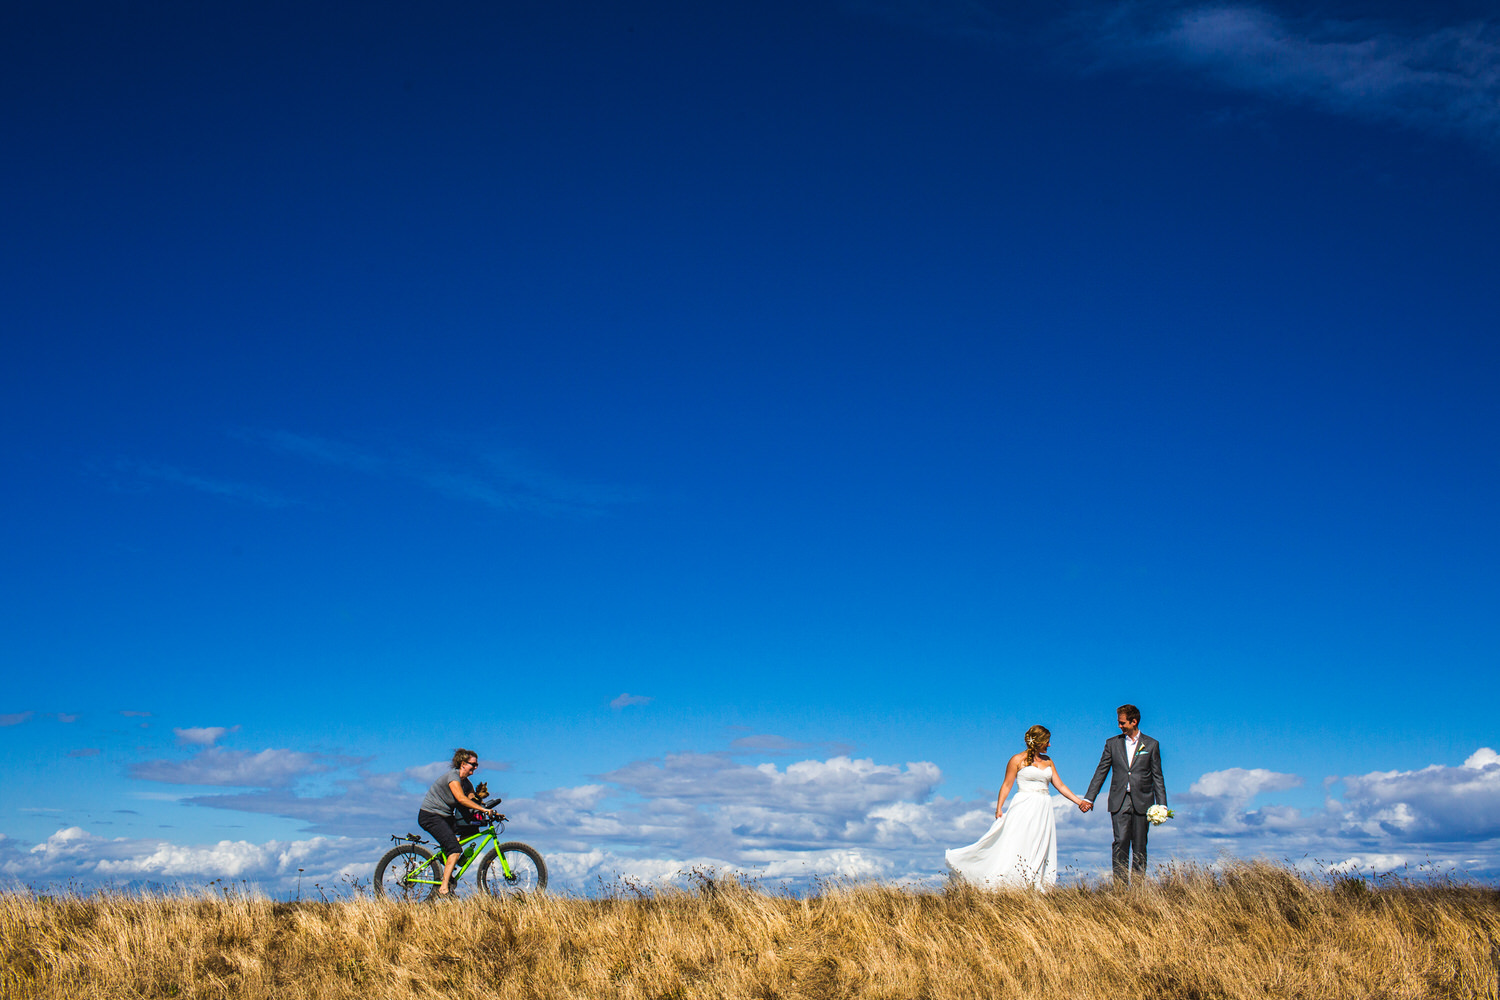 cyclists passes by bride and groom at beach